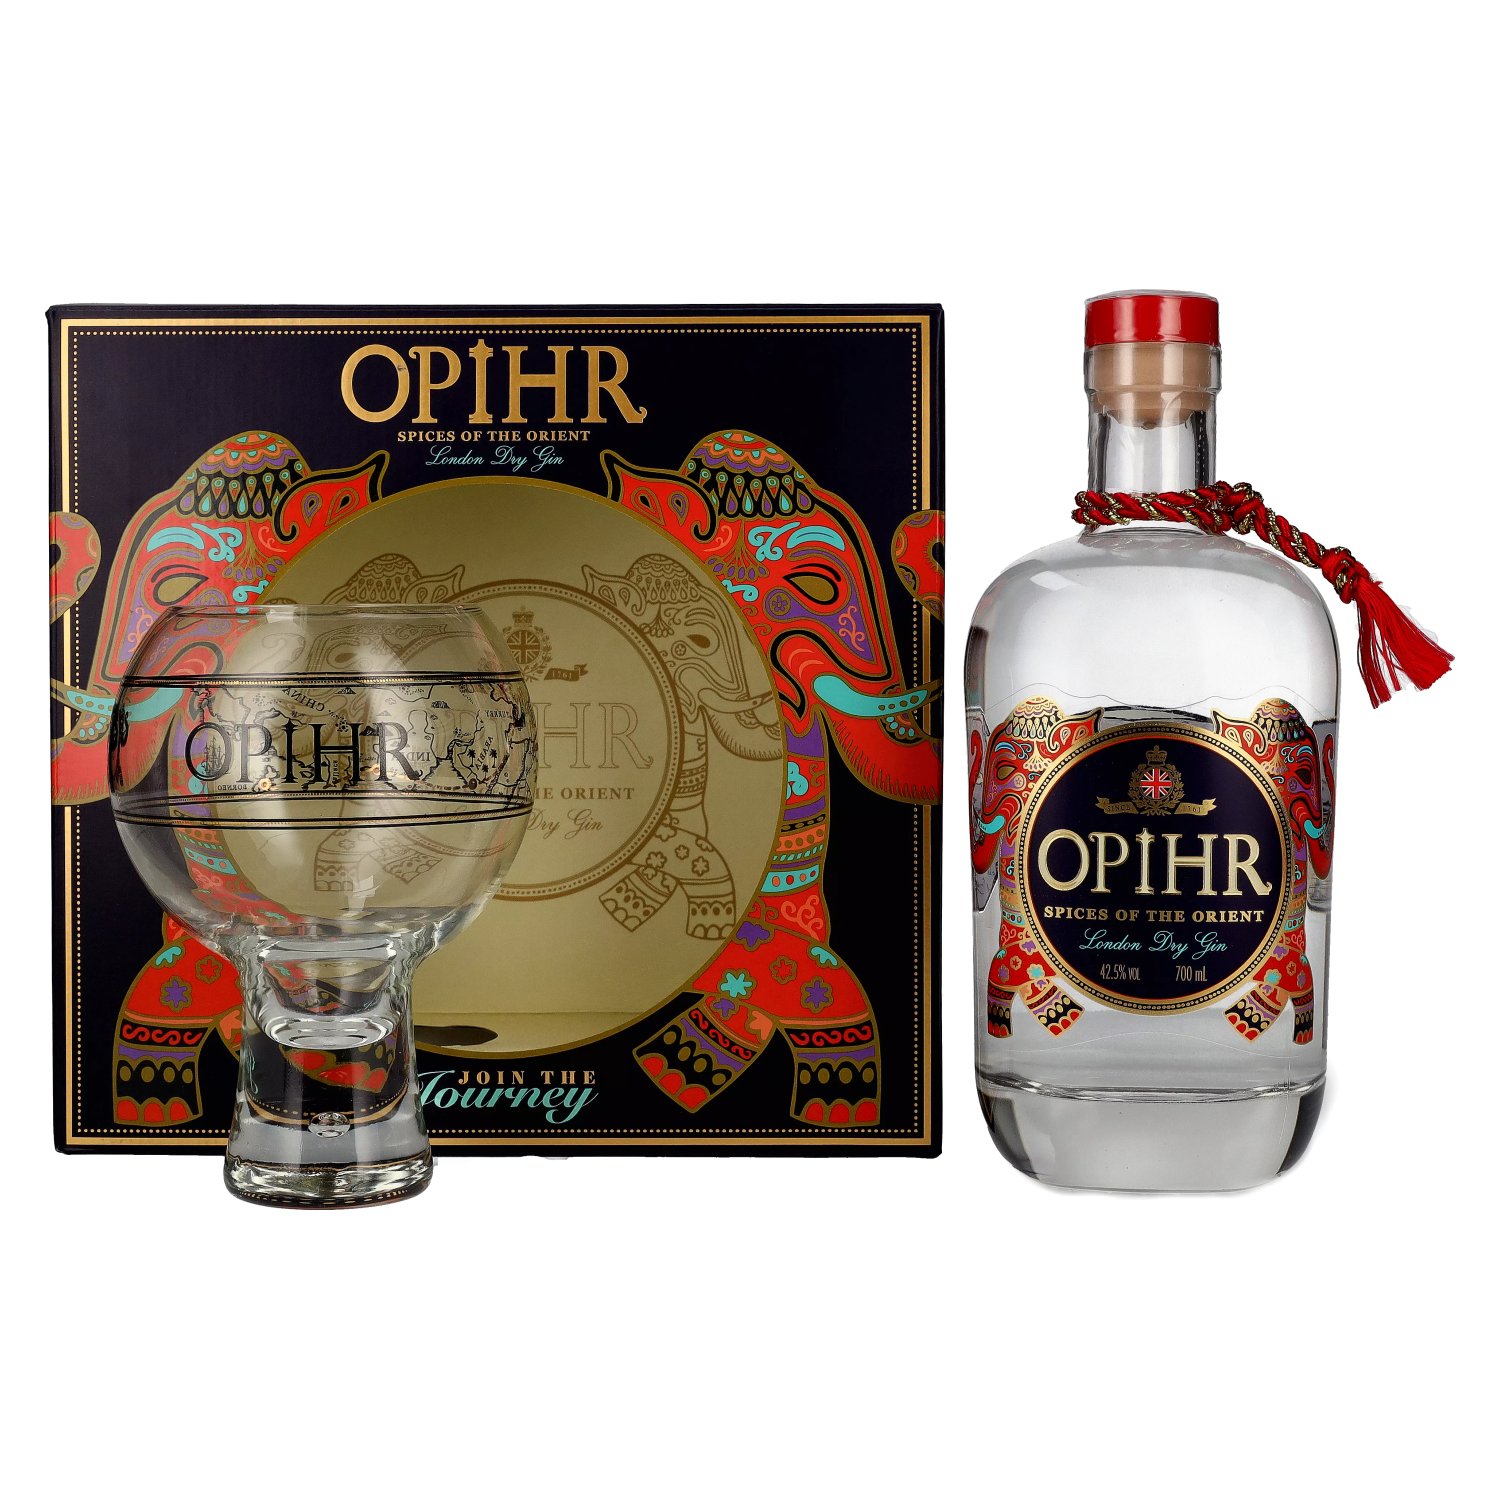 Giftbox ORIENTAL Vol. London 0,7l with Dry Globe-glass Opihr SPICED 42,5% in Gin